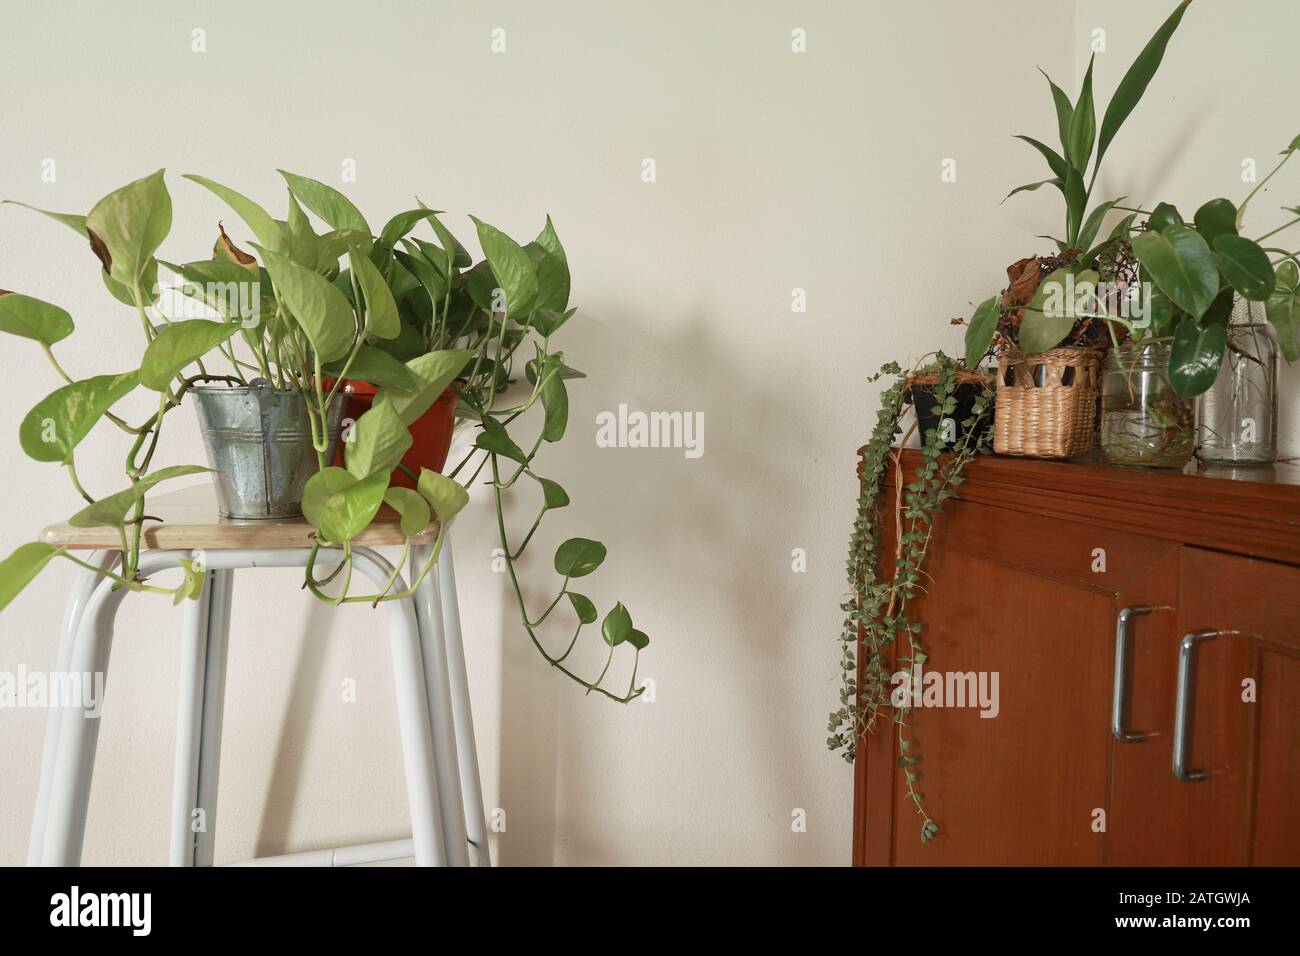 Simple and fresh home decoration for Spring using houseplants to create a calming and gender neutral living space Stock Photo